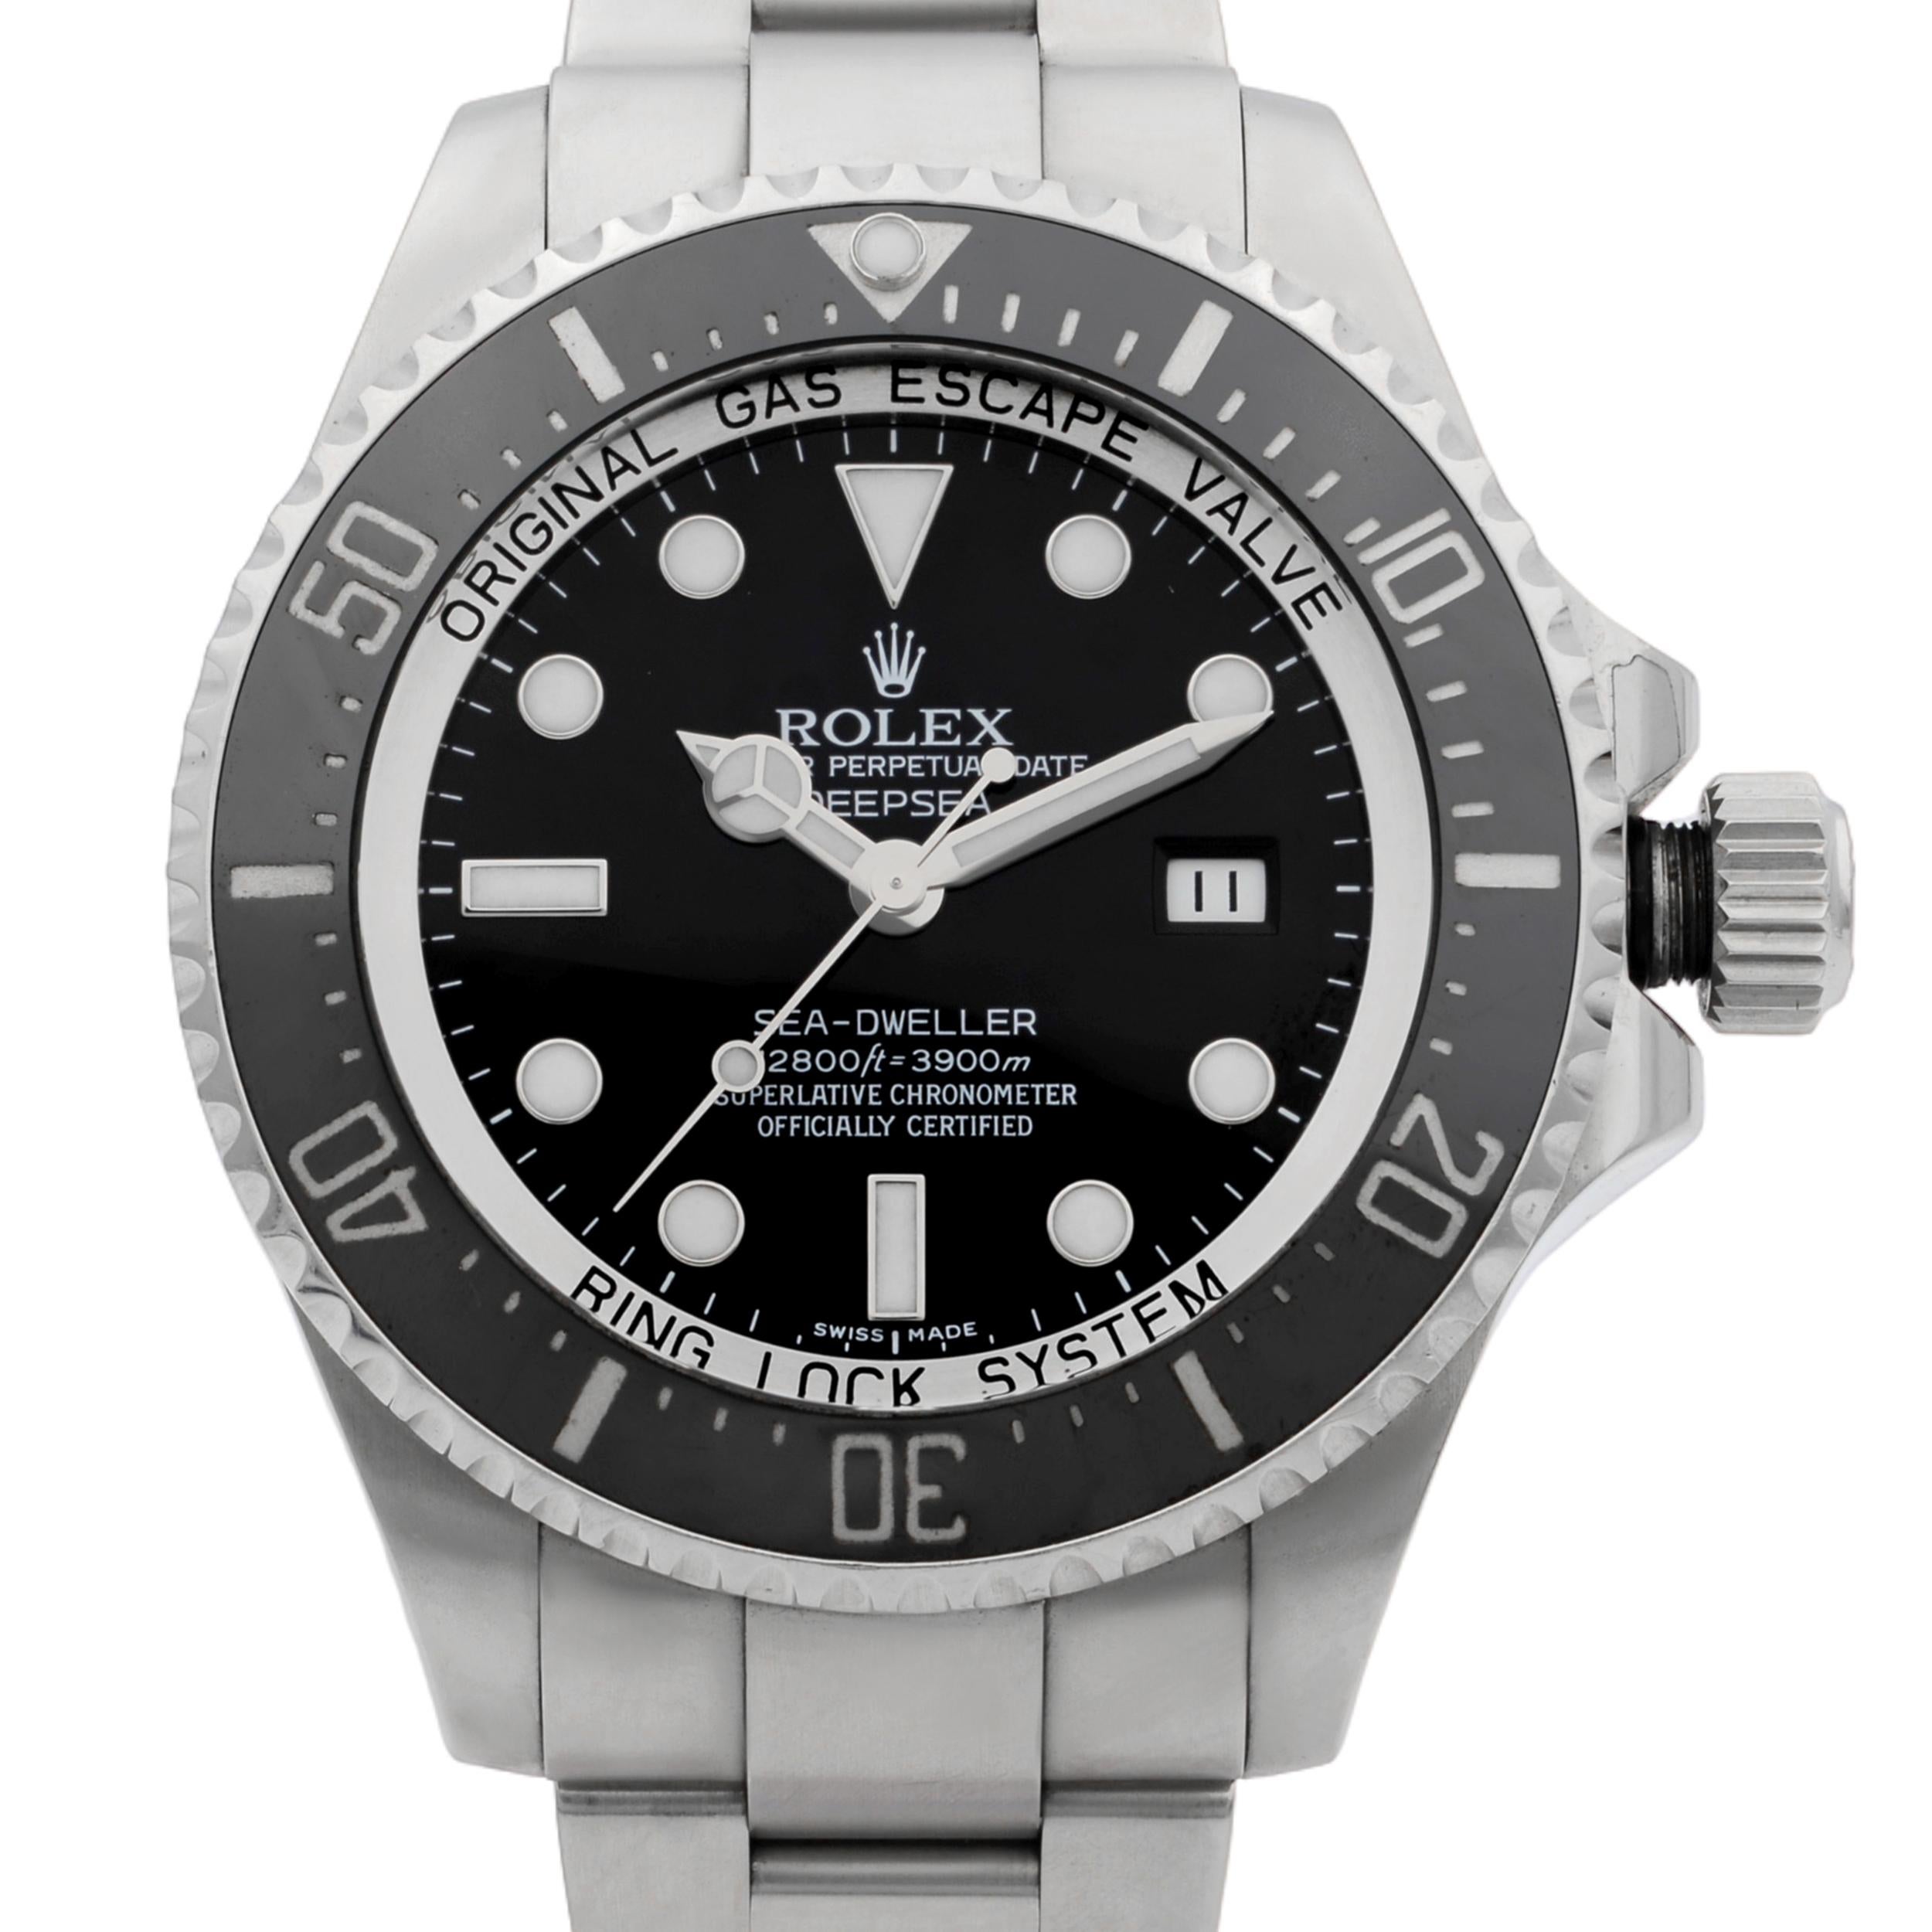 This pre-owned Rolex Deepsea  116660  is a beautiful men's timepiece that is powered by the mechanical (automatic) movement which is cased in a stainless steel case. It has a round shape face, date indicator dial, and has hand sticks & dots style